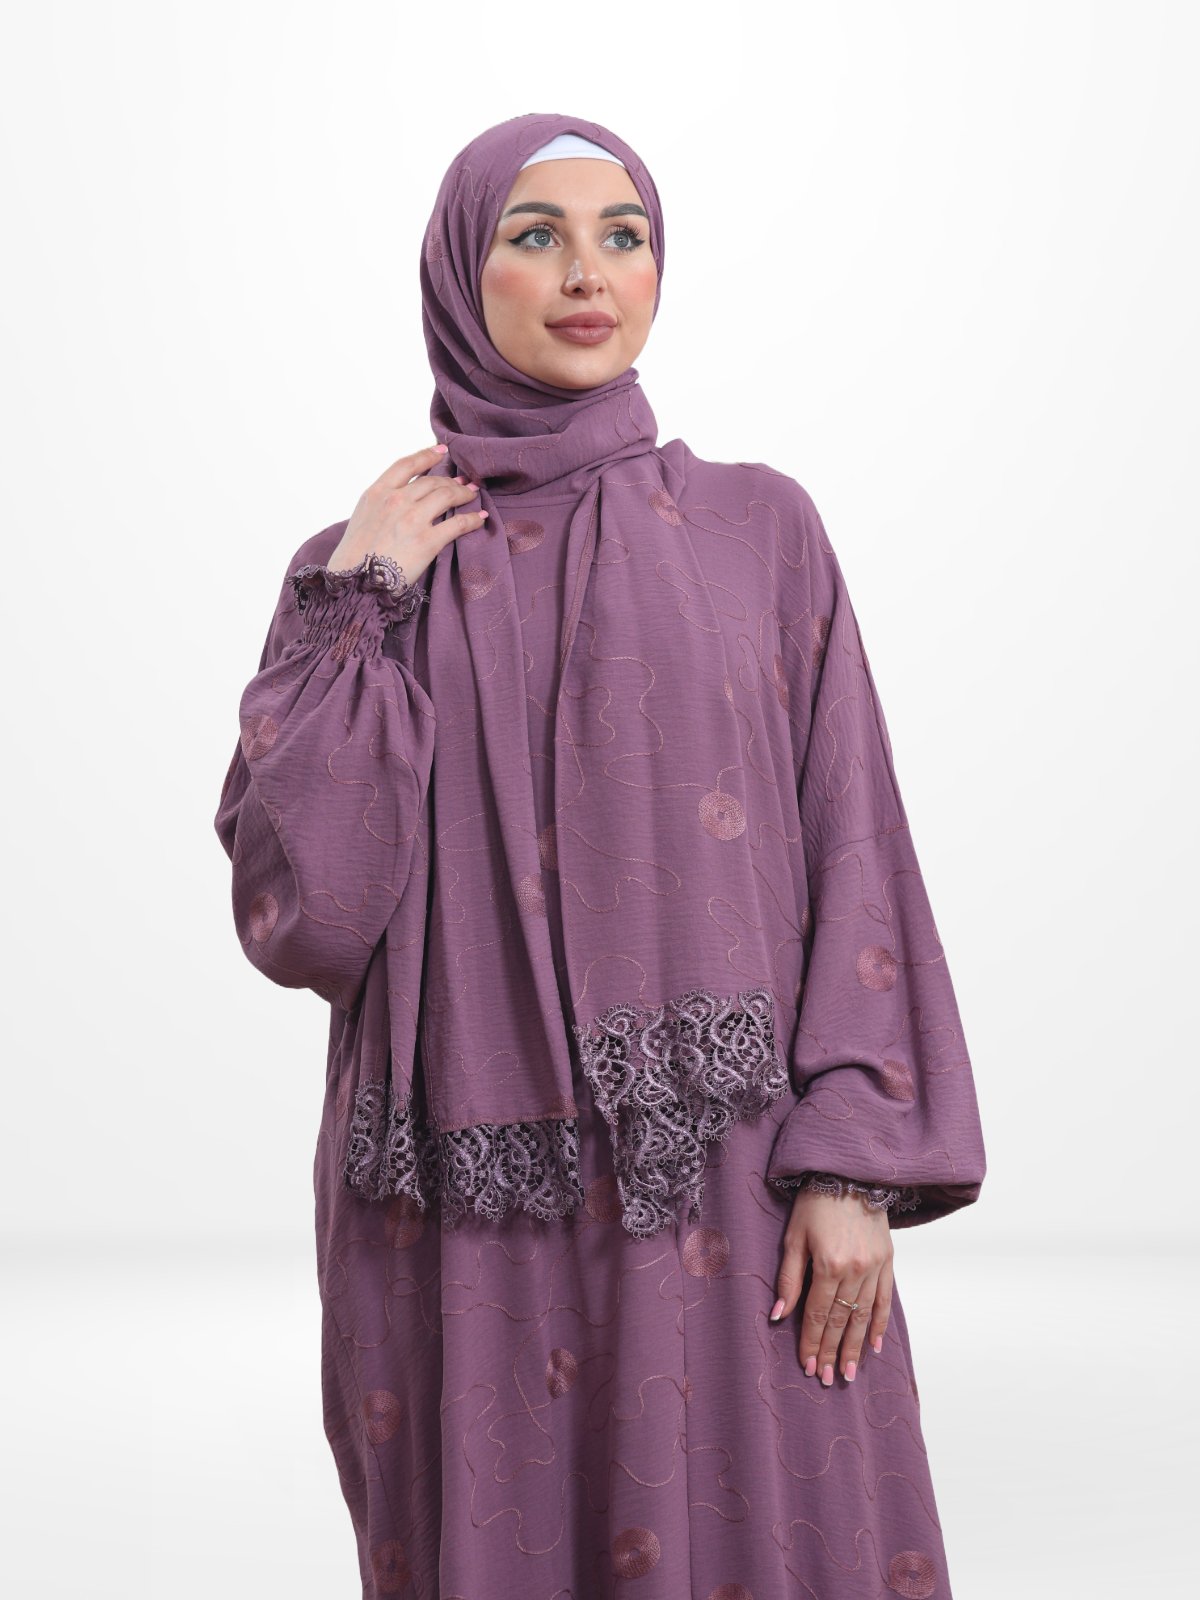 One - Piece Prayer Dress & Abaya with attached Hijab - Embroidered - Modest Essence